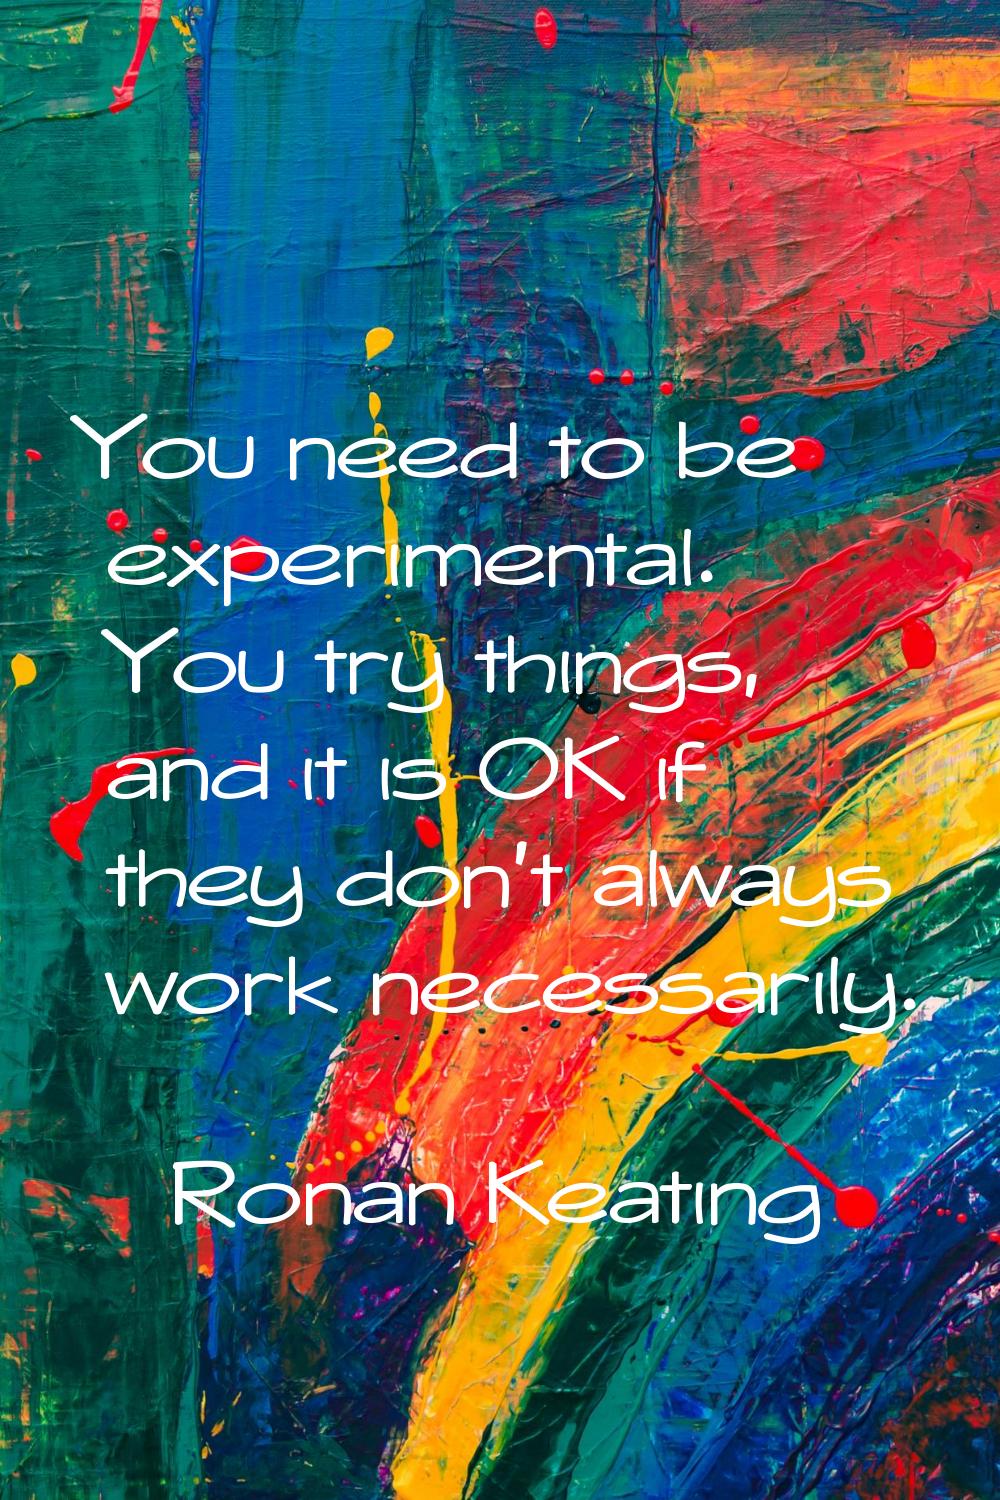 You need to be experimental. You try things, and it is OK if they don't always work necessarily.